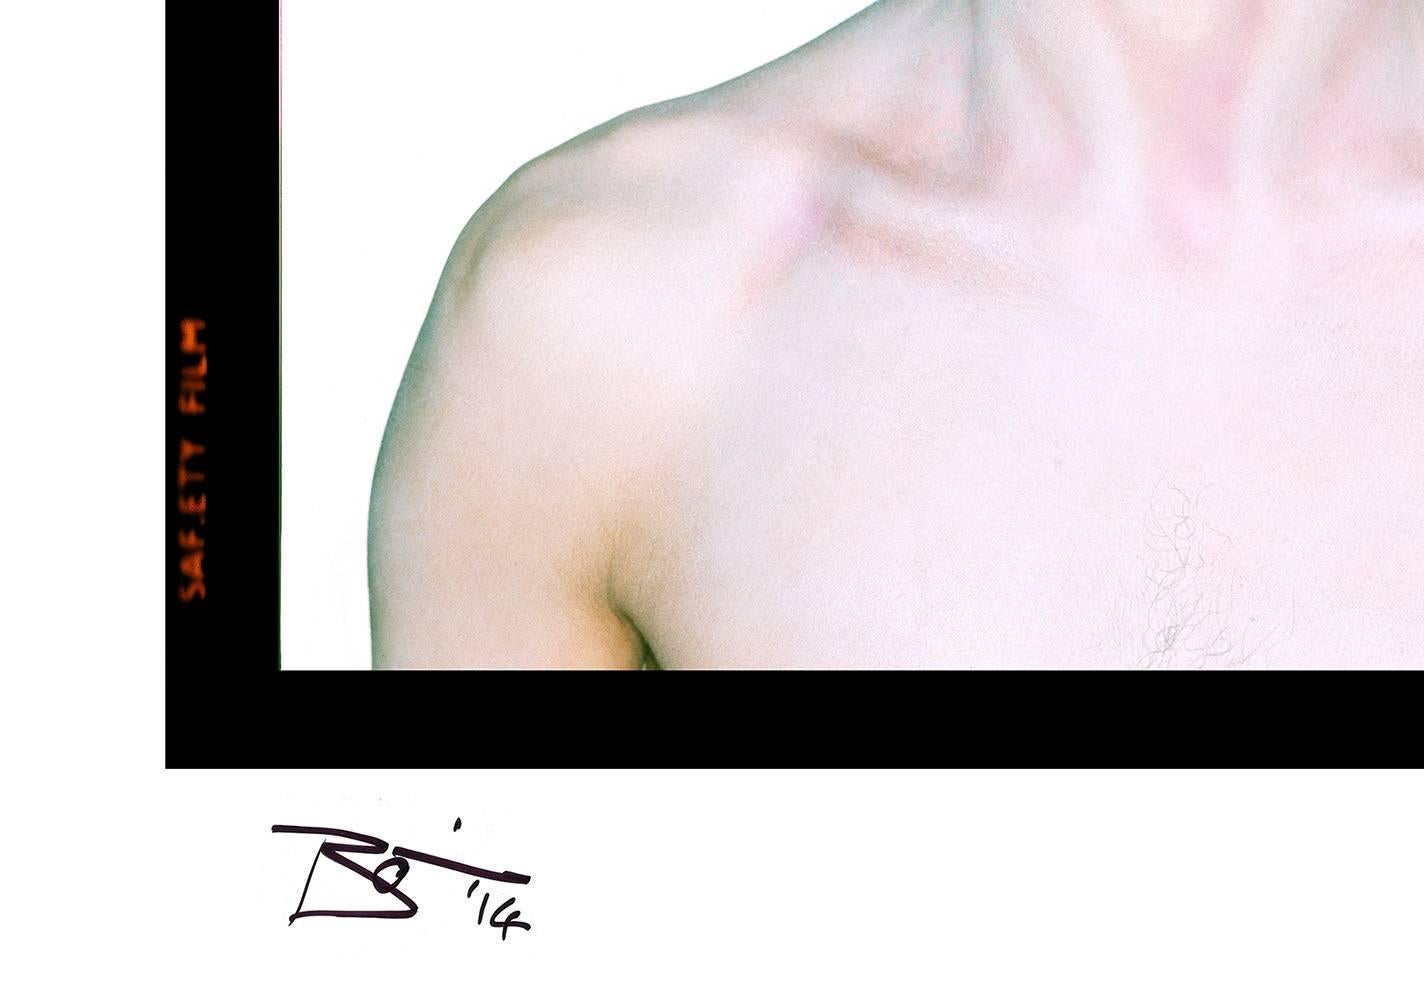 Aladdin Sane - Eyes Open 1973 -  Signed by David Bowie - Photograph by Brian Duffy